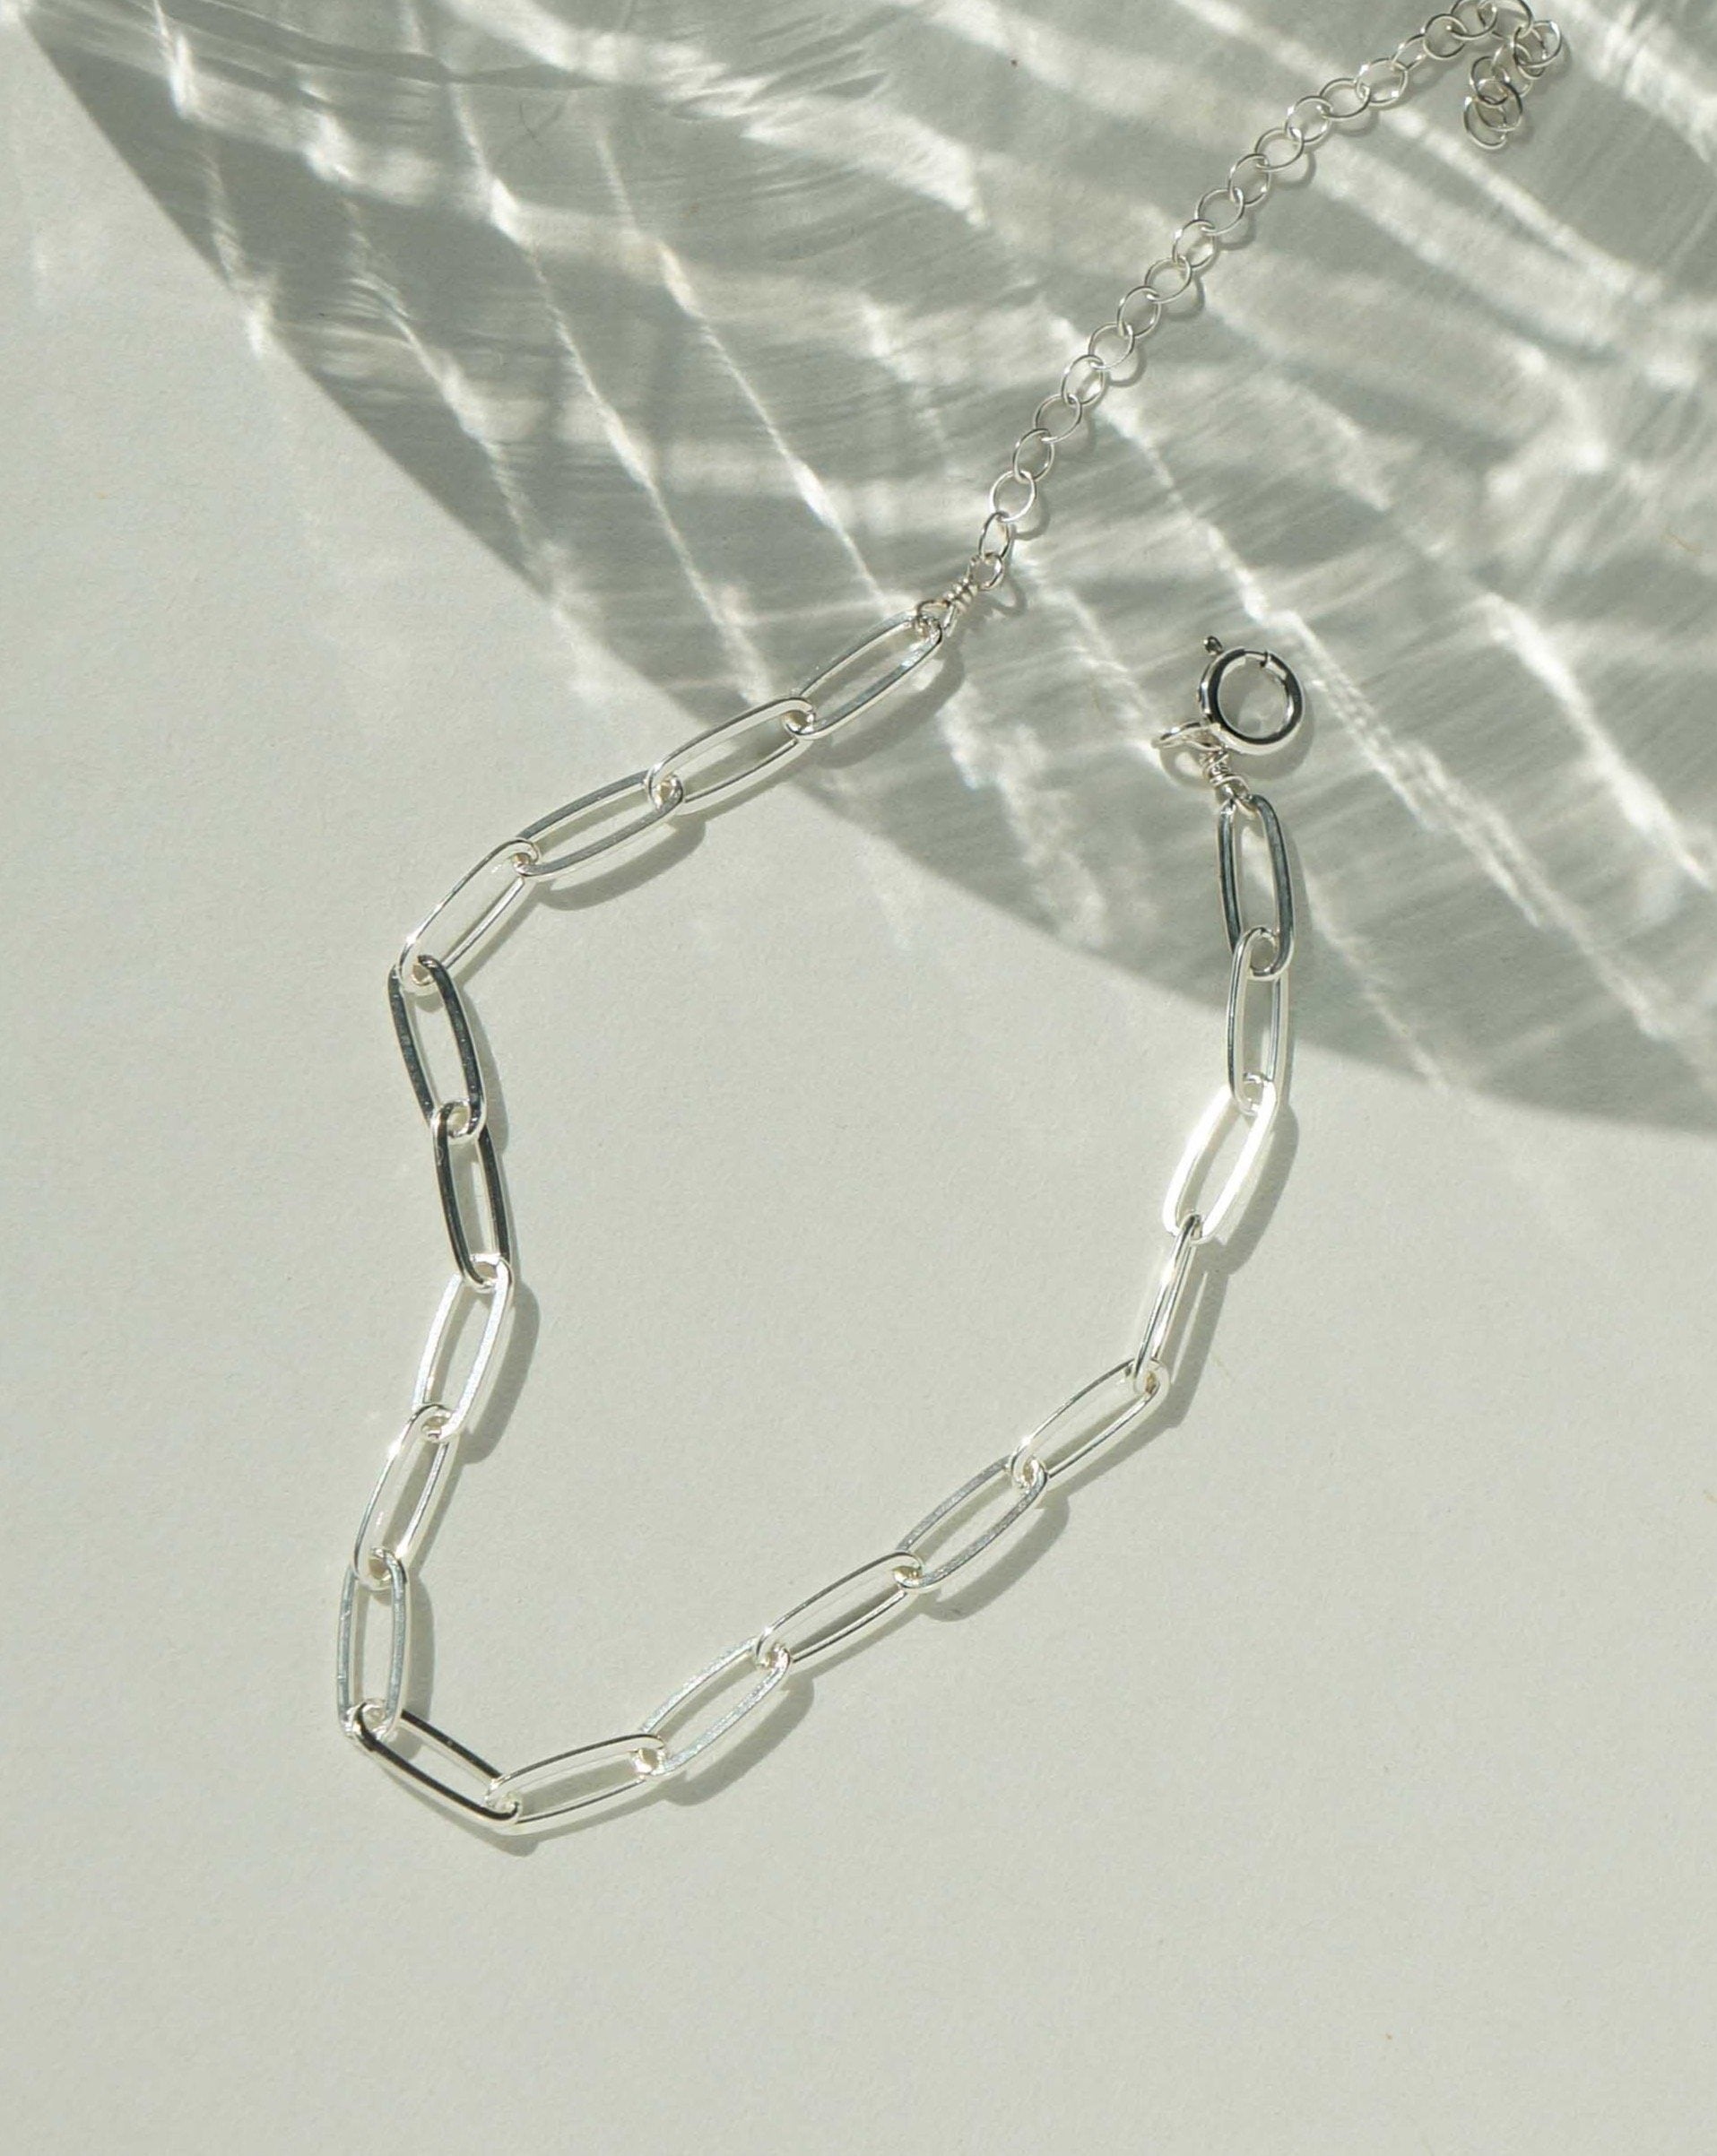 Norita Bracelet by KOZAKH. A 6 to 7 inch adjustable length, thin flat link paperclip style chain bracelet, crafted in Sterling Silver.